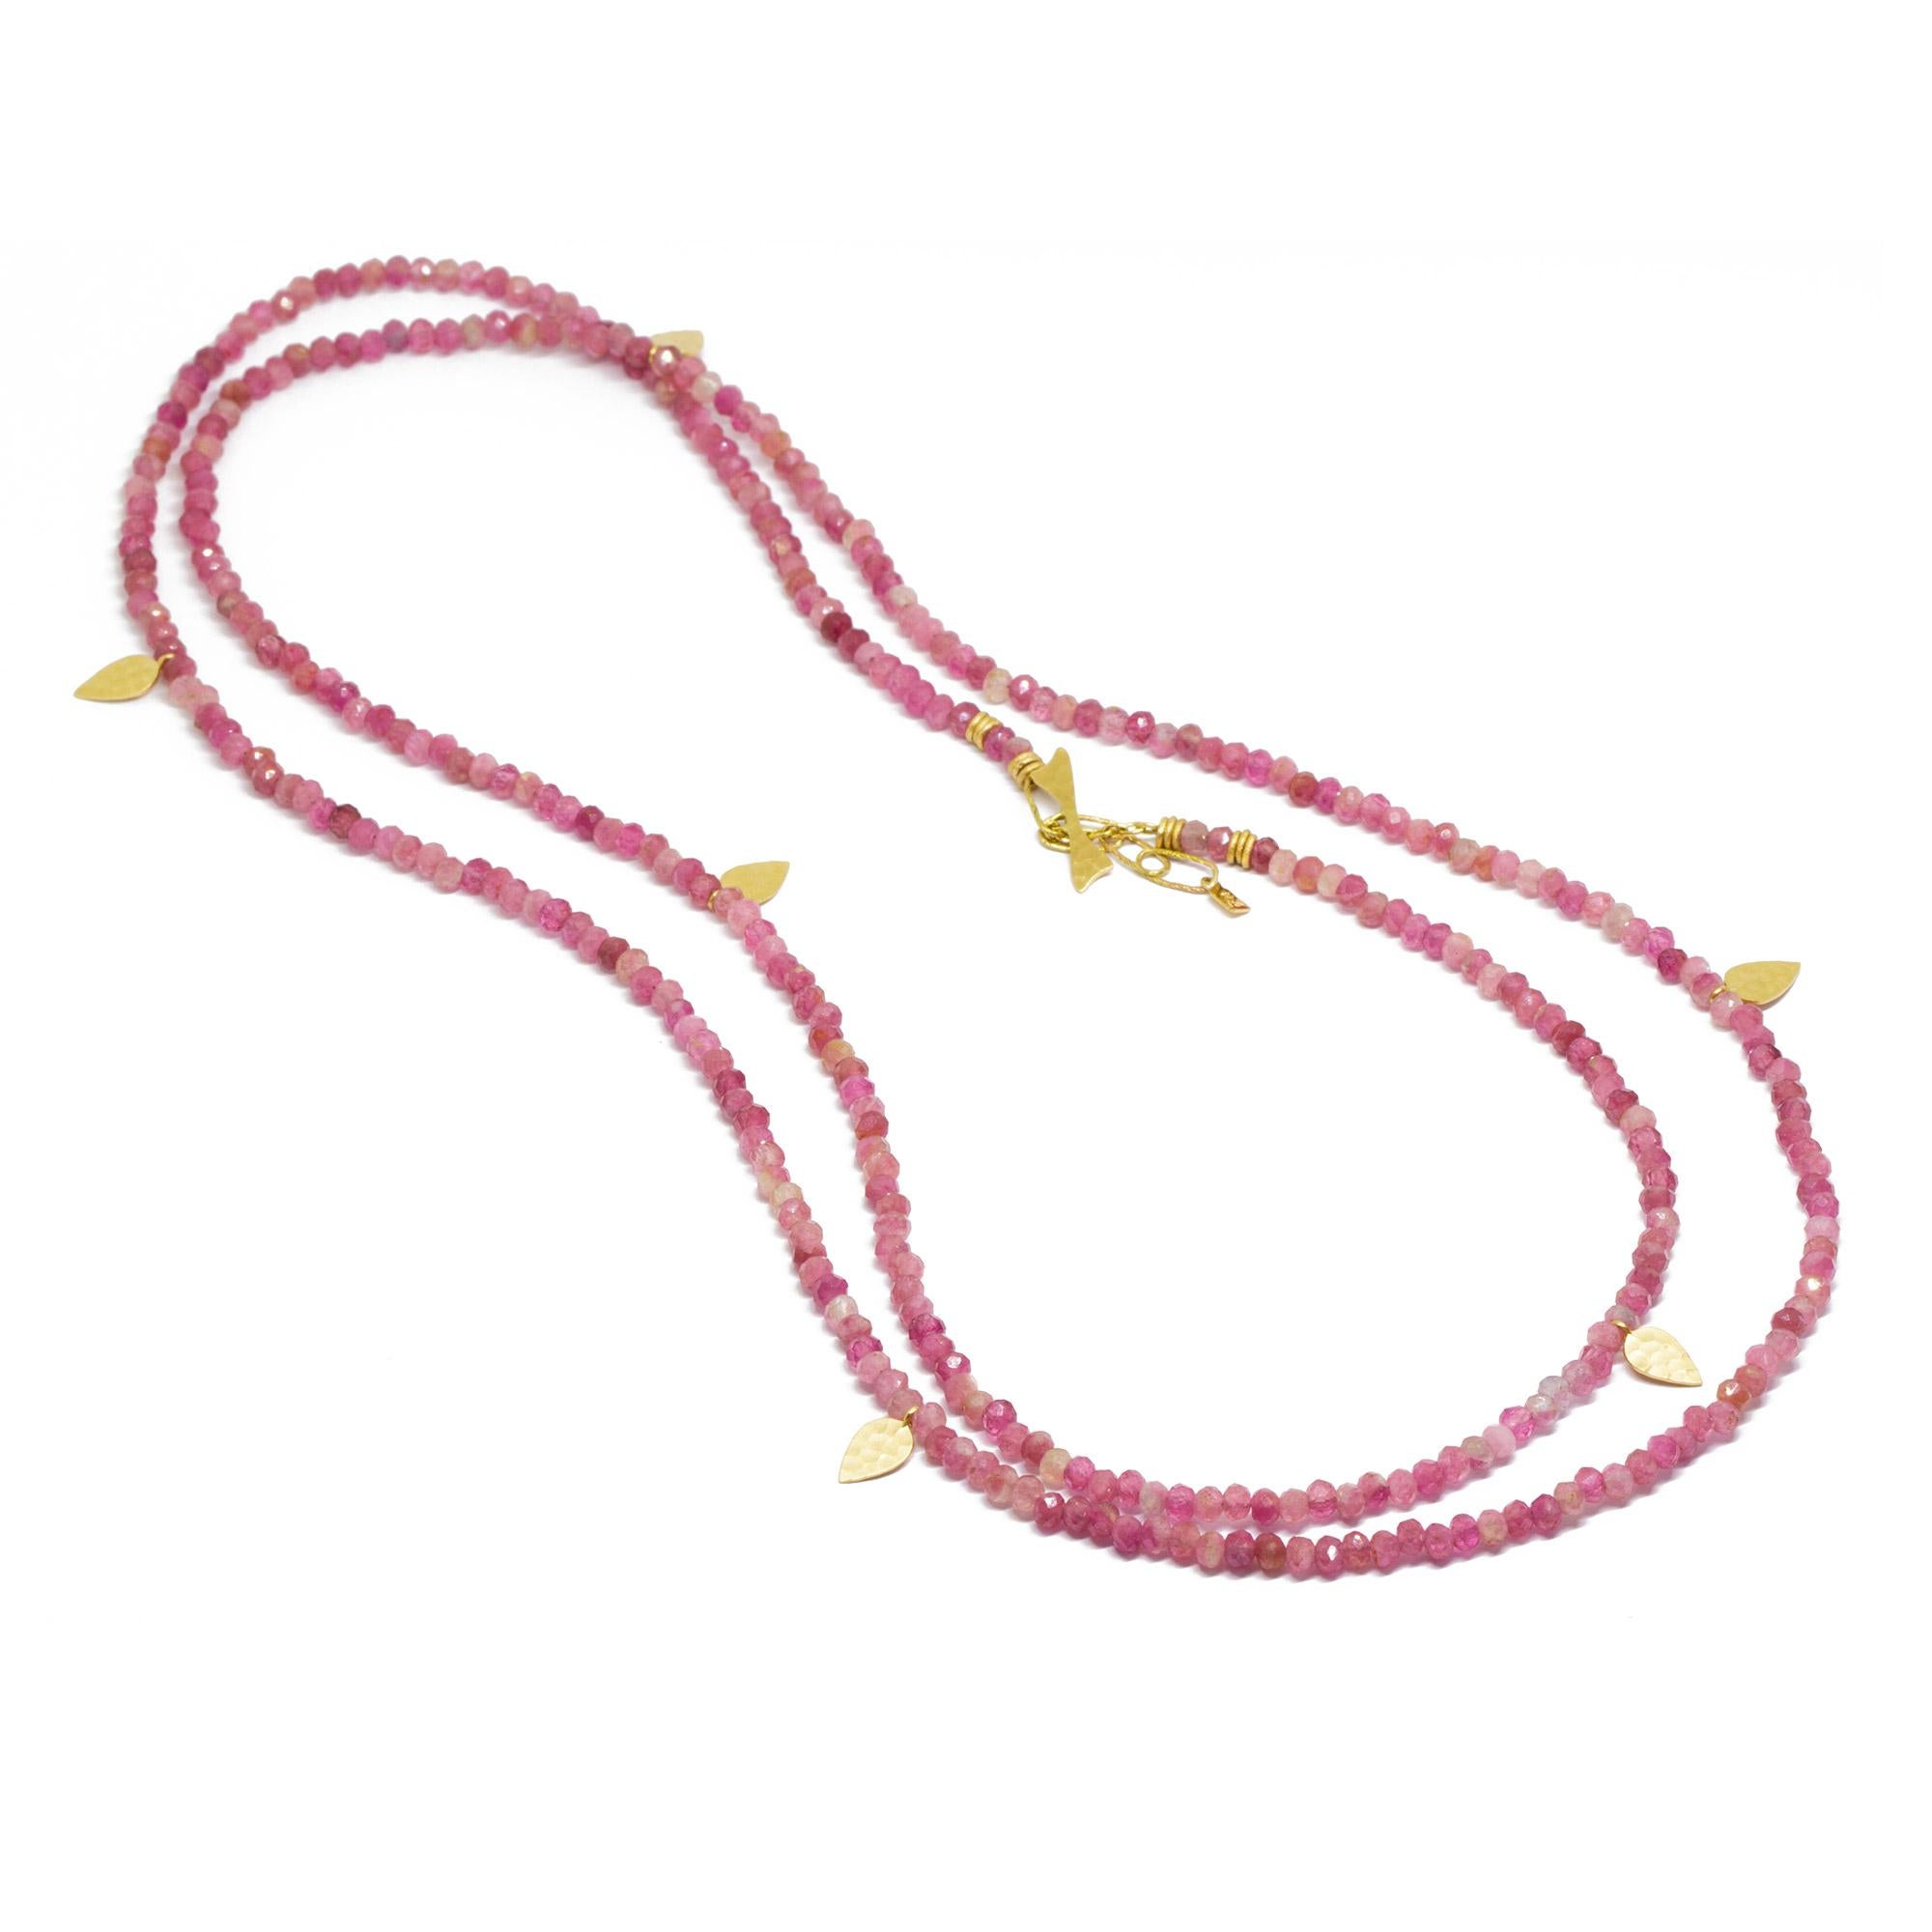 The best part about our Heritage Red Tourmaline Necklette isn’t just that it can be worn long, doubled-up, or as a wrap bracelet (although that’s pretty cool). It’s that you can thread any of our Charms onto the red tourmaline beads—have fun playing